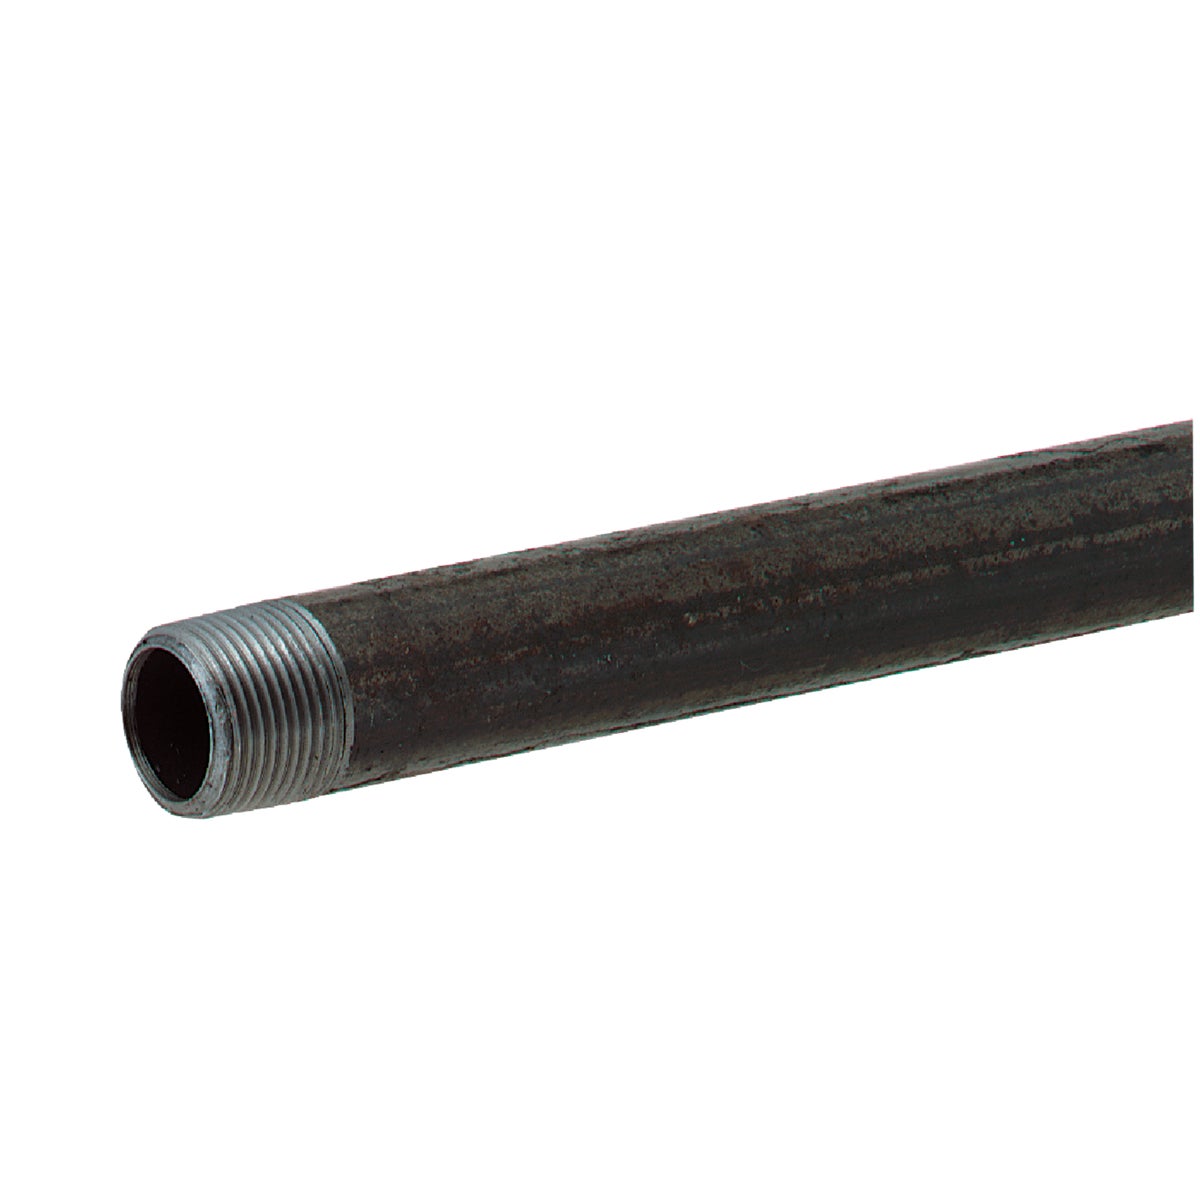 1-1/4X48 BLK RDI-CT PIPE